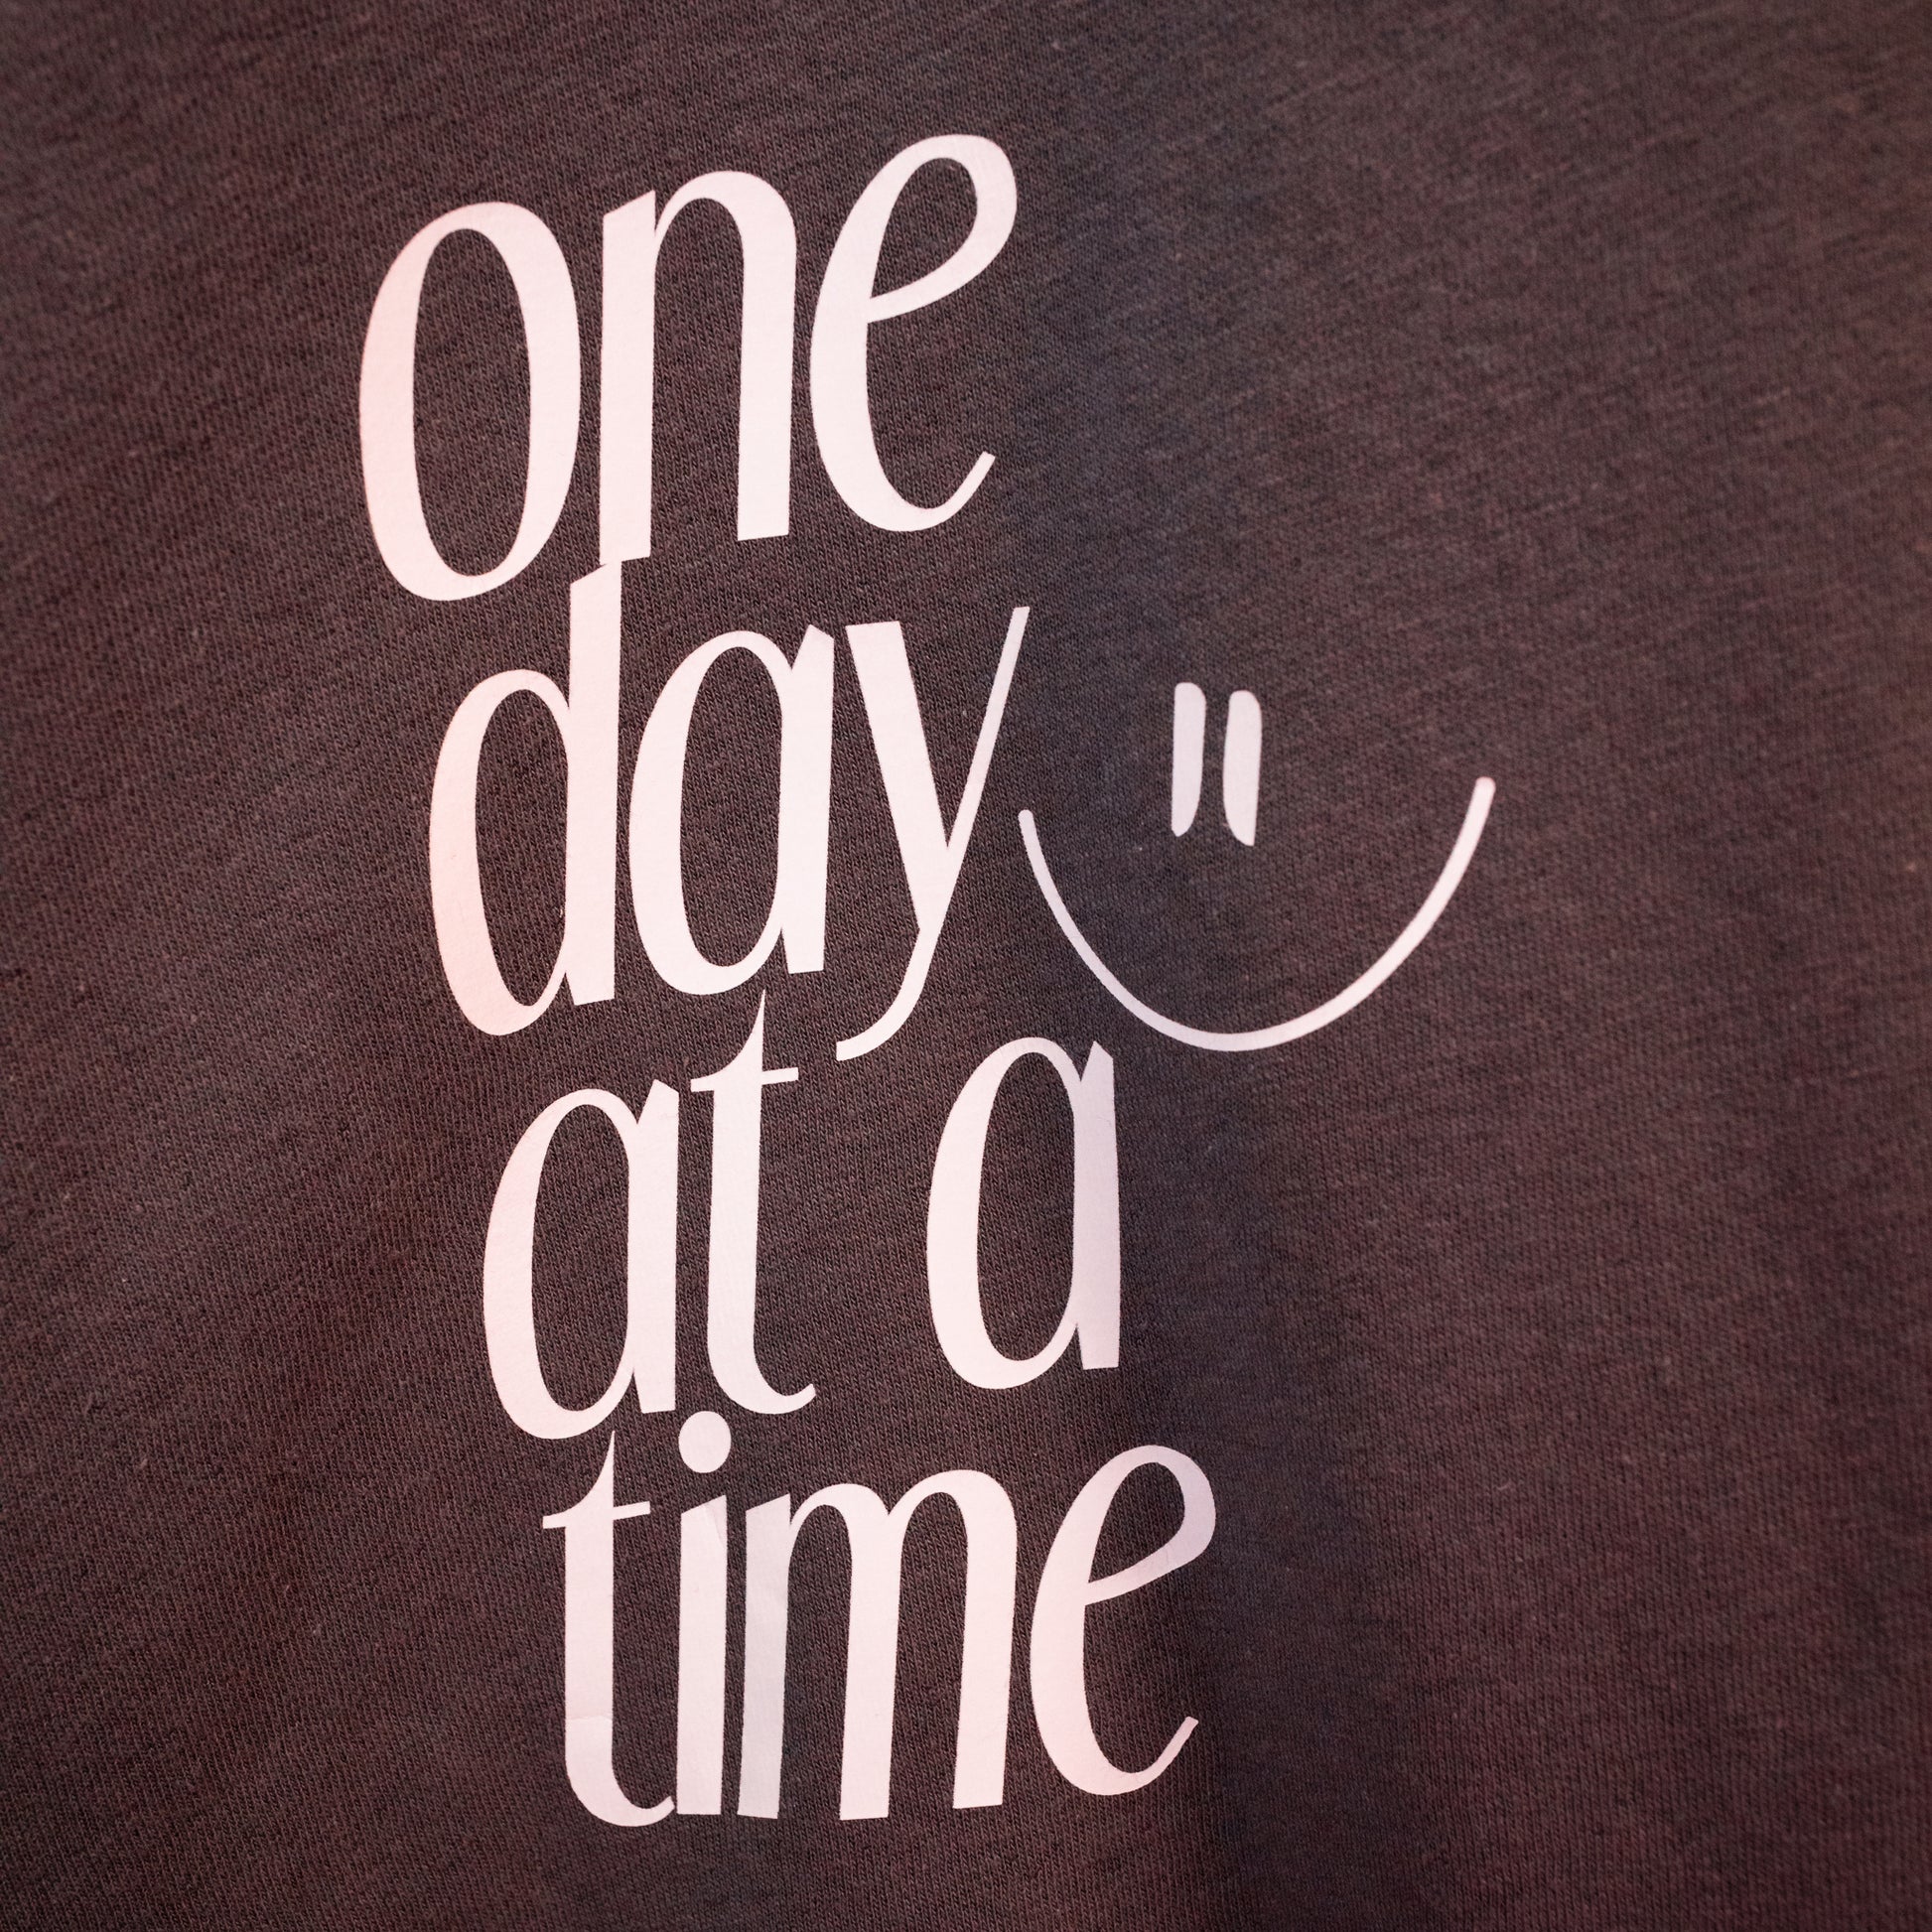 one day at a time smiley face 